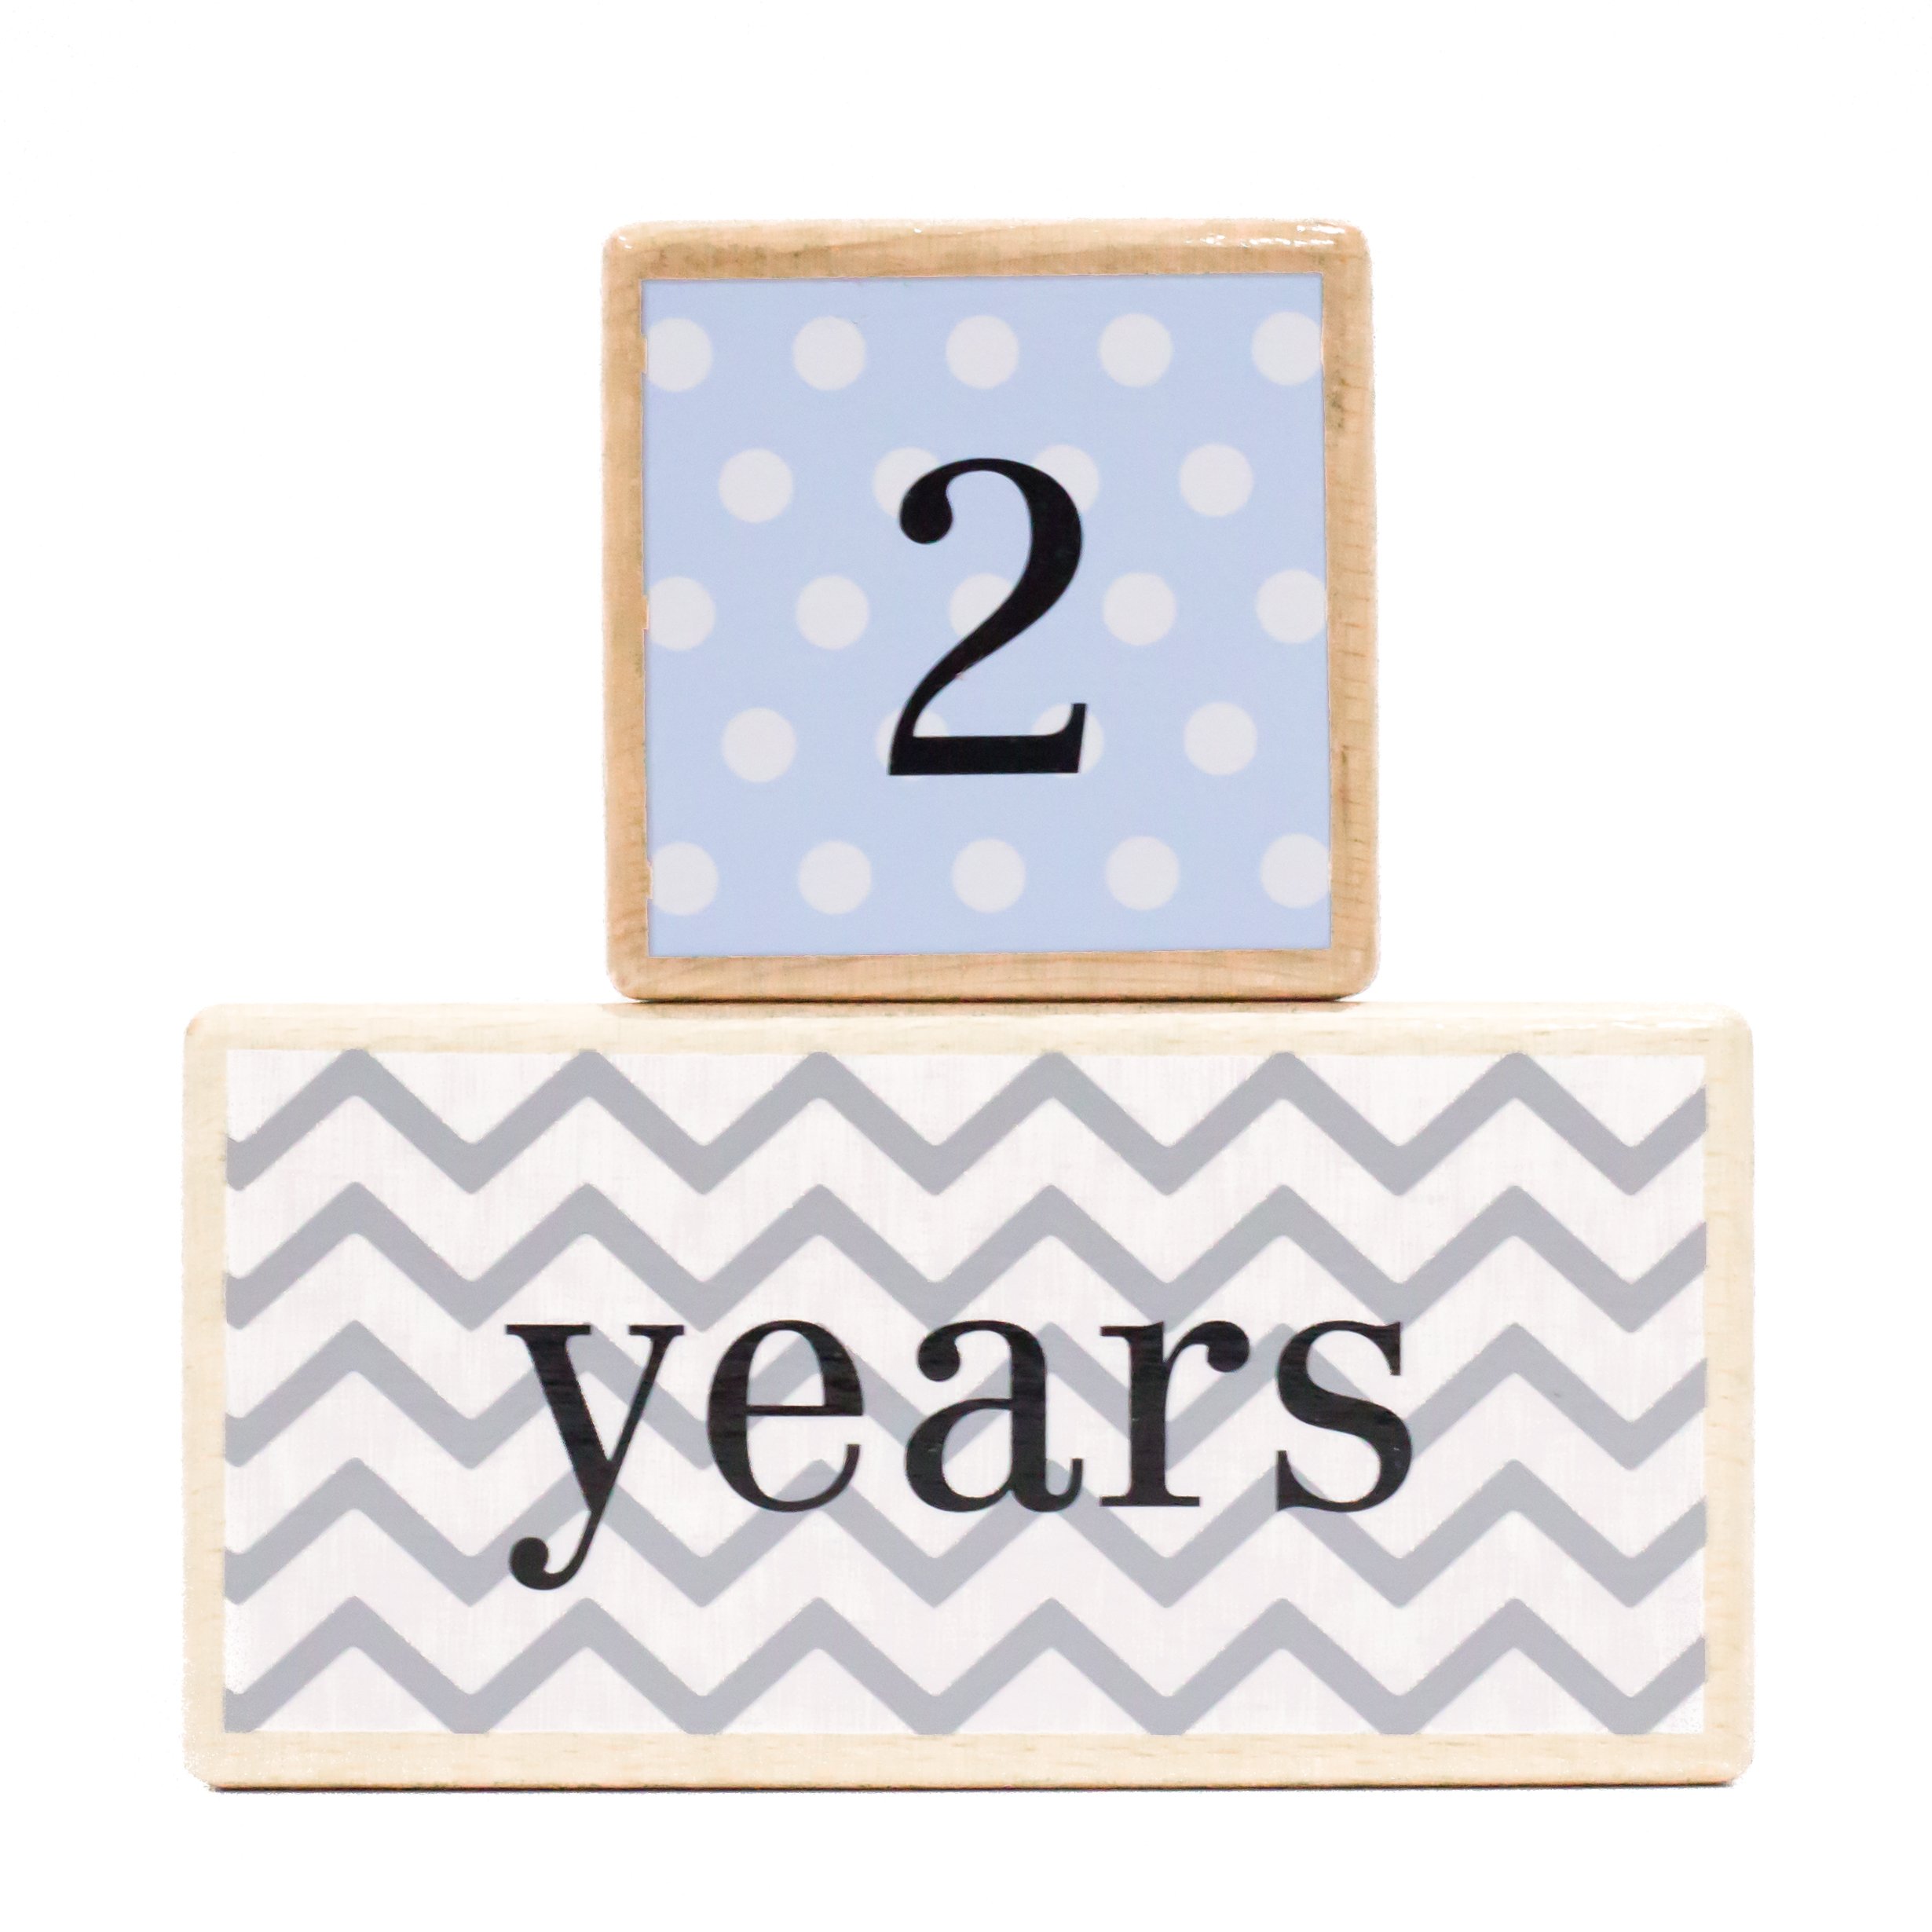 Solid Wood Milestone Age Blocks in Blue. Baby Age Photo Blocks and Photo Props…